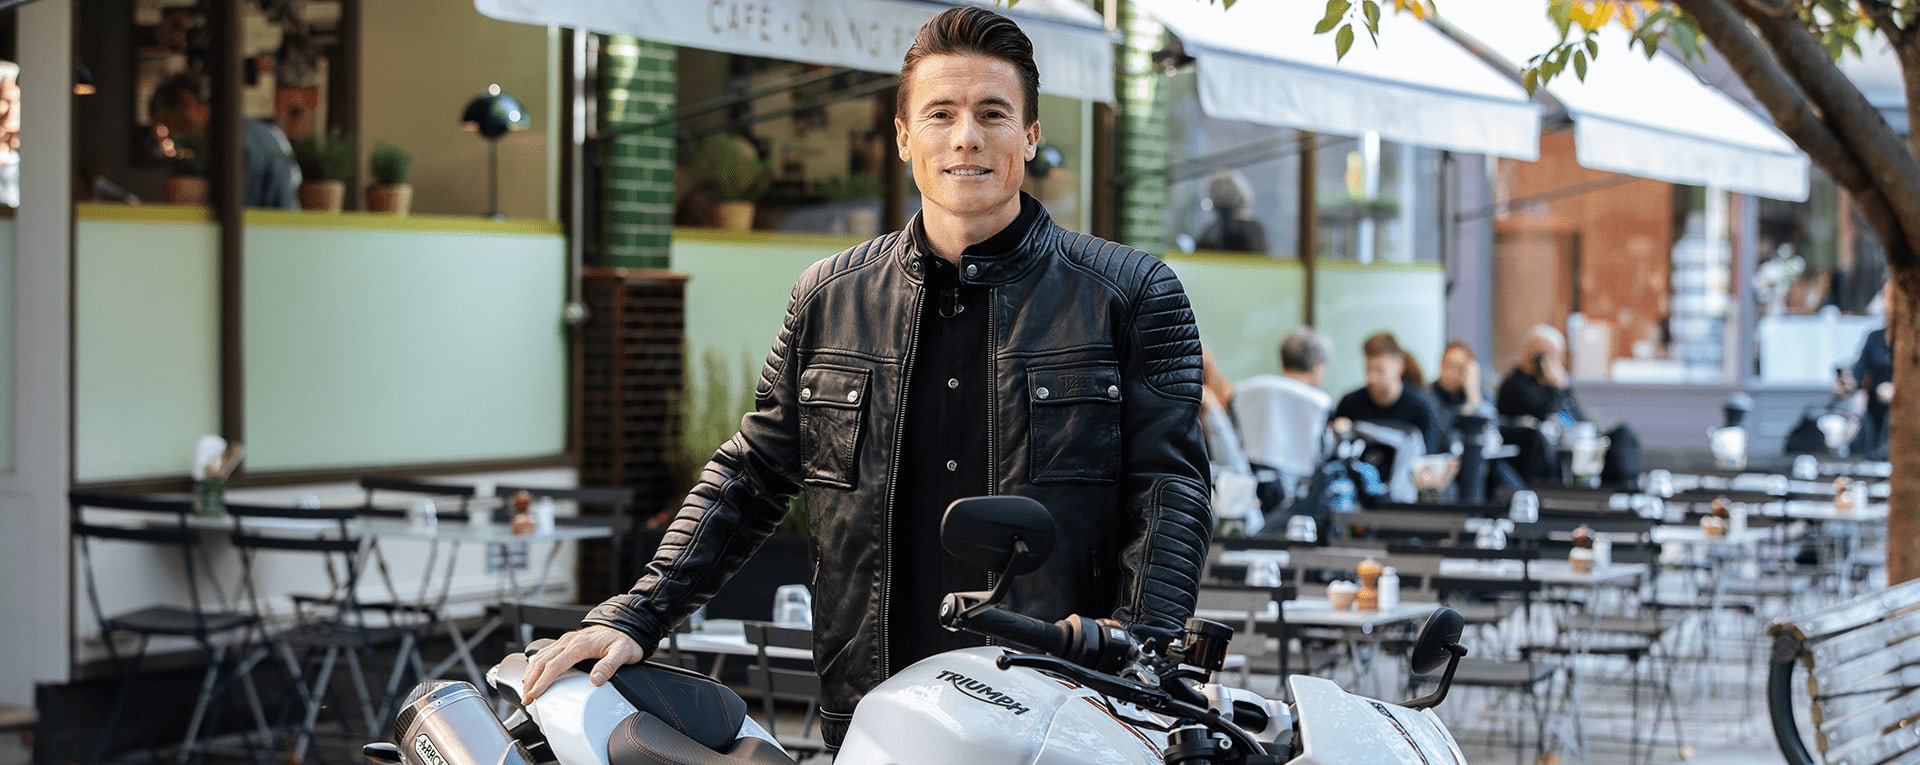 James Toseland stood with Triumph Speed Triple